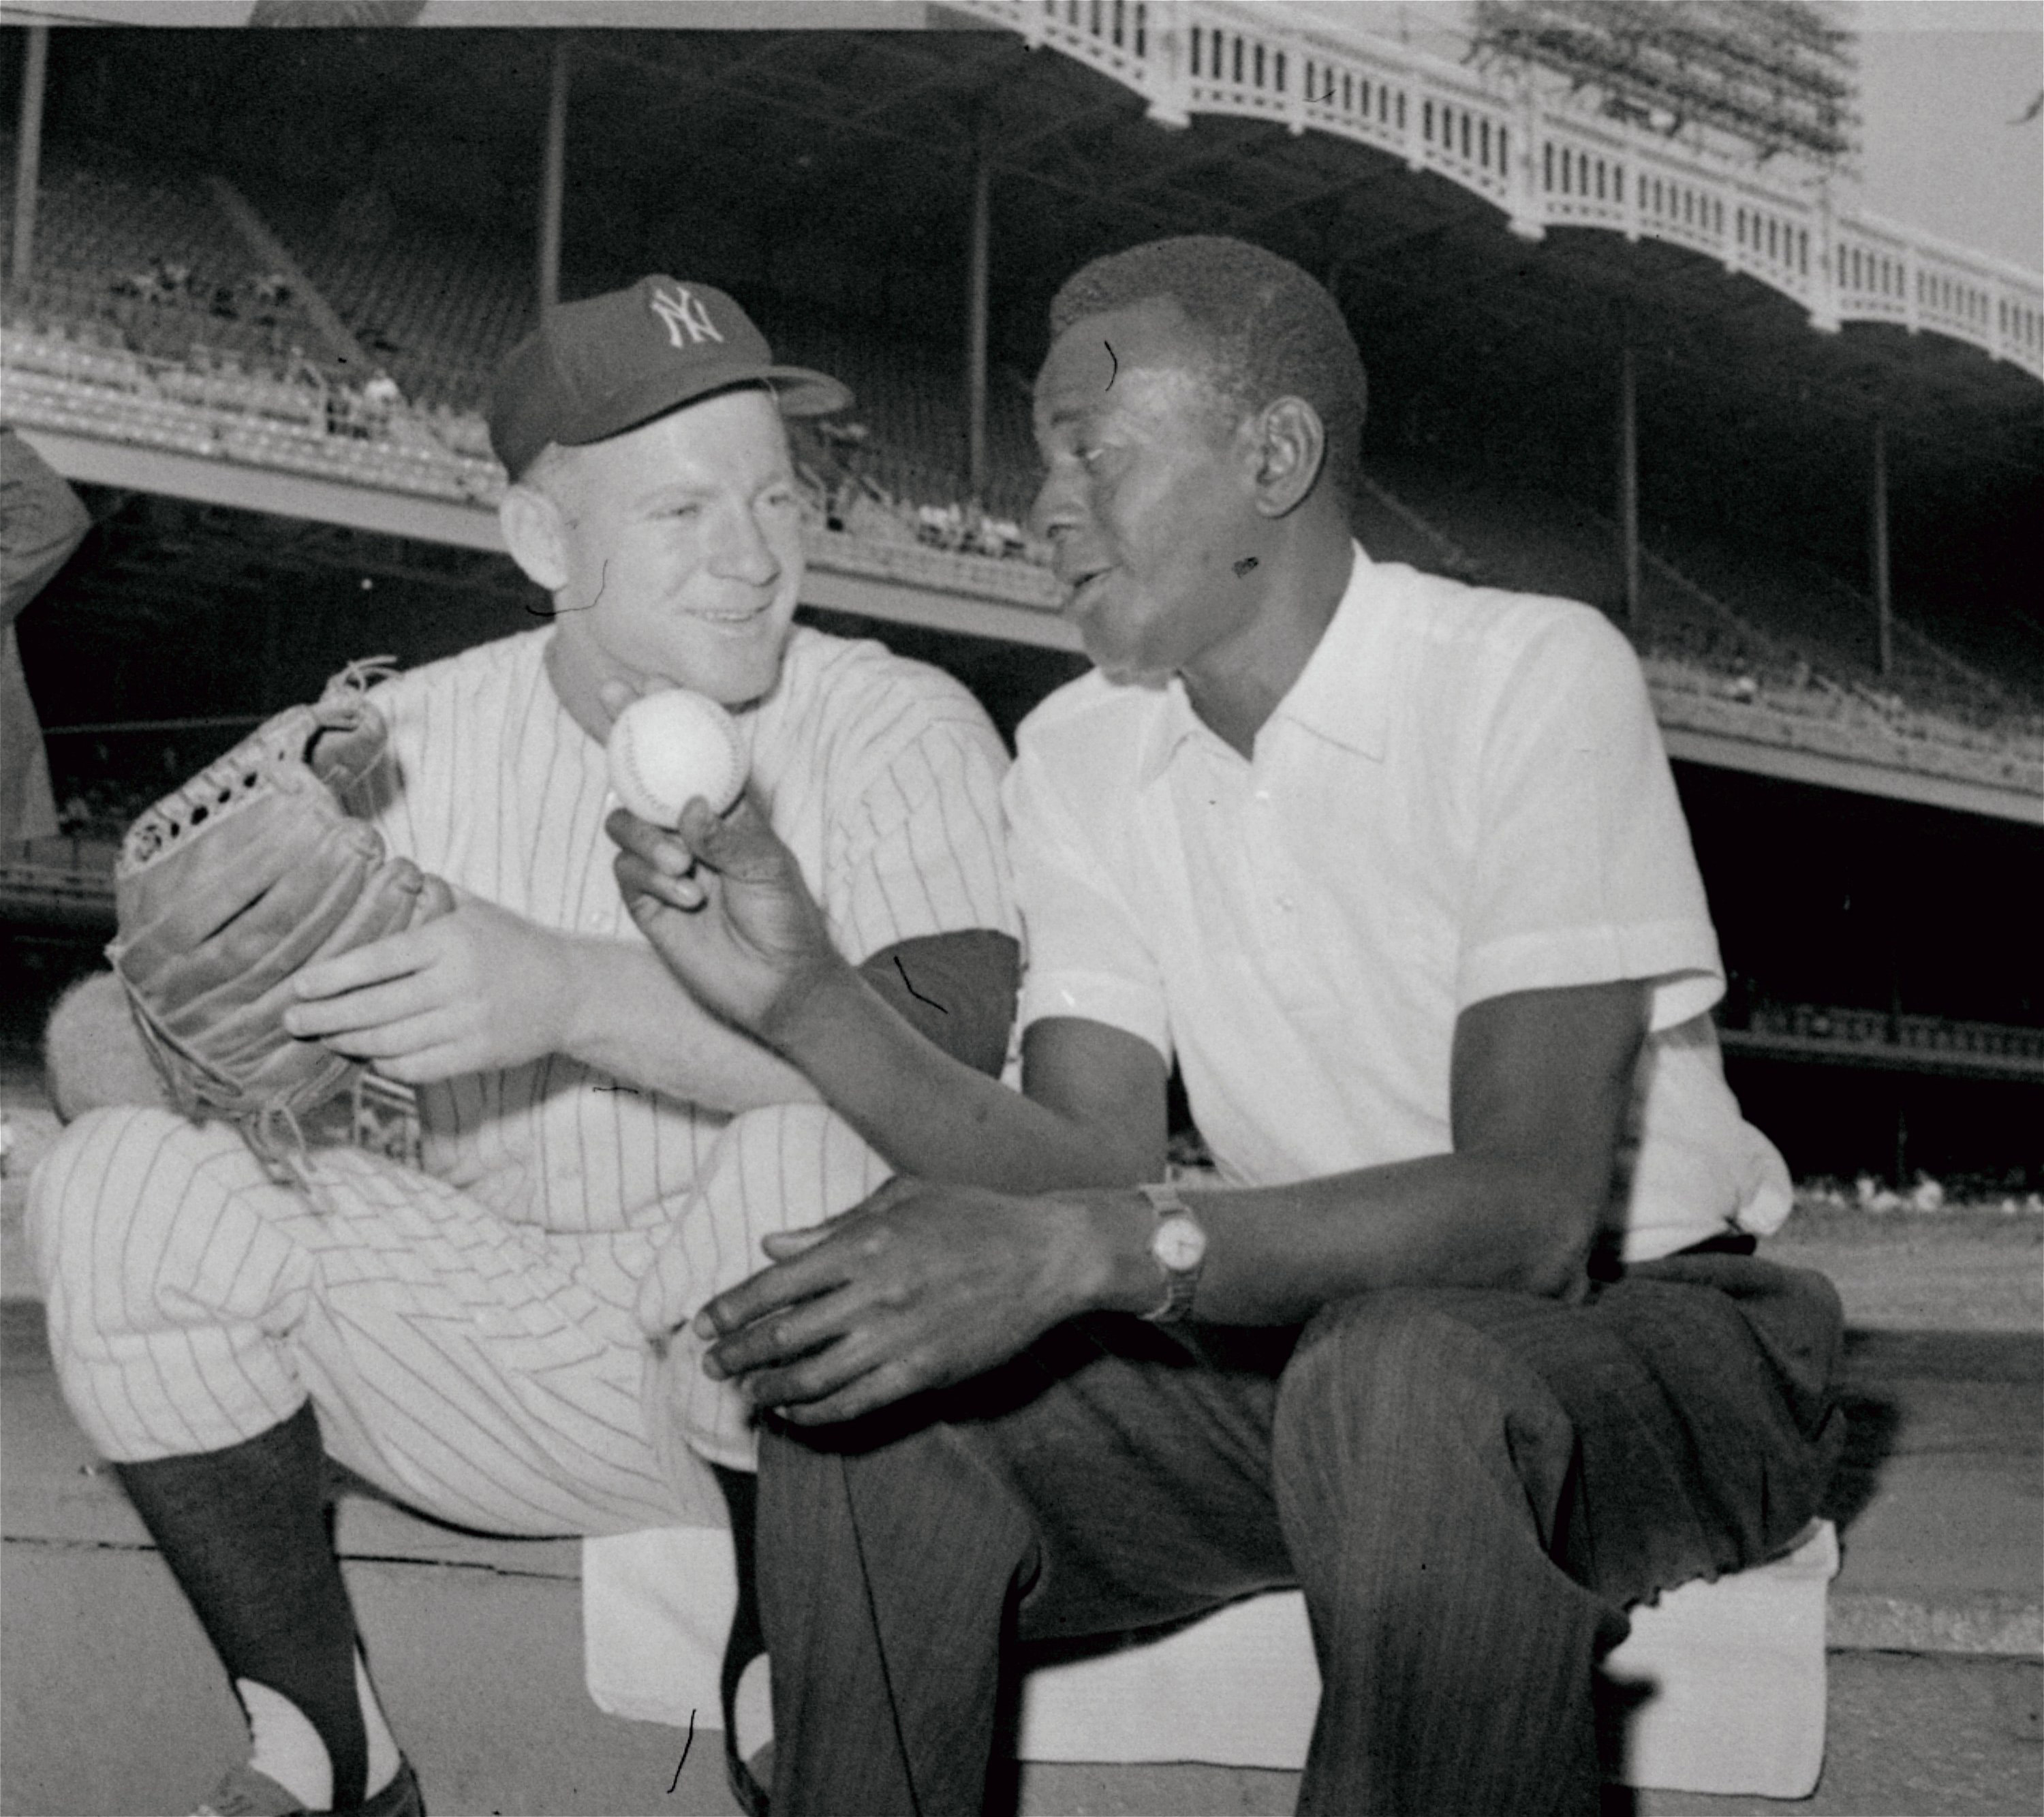 New York Yankee pitcher Whitey Ford, left, and Satchel Paige swap pitching talk on steps of the Yankee dugout in New York on Aug. 17, 1961. Paige and Ford talked before the Yankee game with Chicago White Sox, and the Yankees went on to win the game, 5-3.